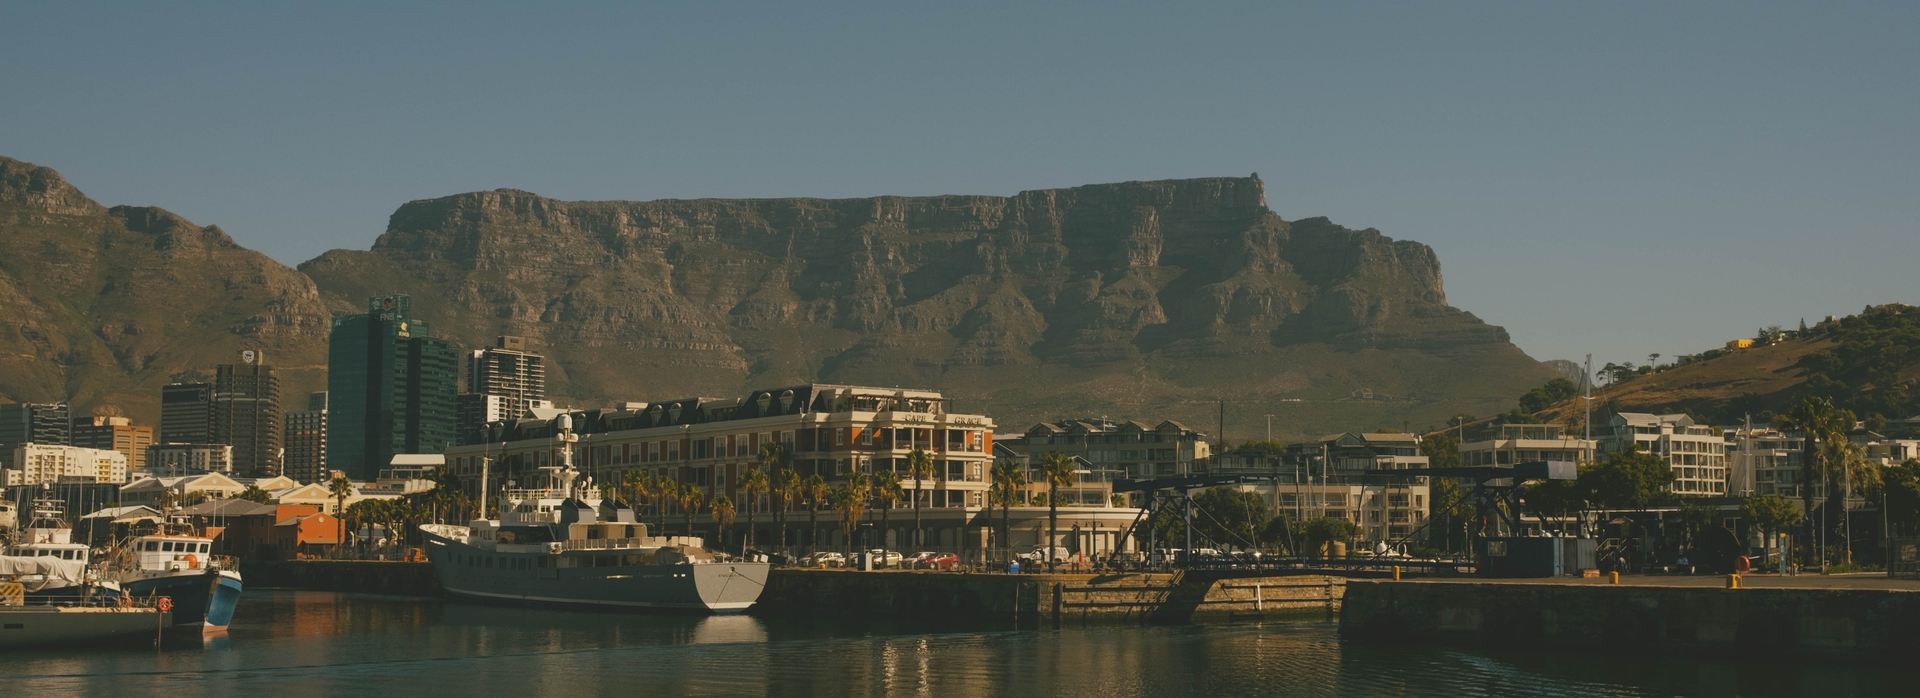 At the V&A Waterfront, looking across the harbor towards the city. There are several boats in the water. In the middle ground are buildings around the waterfront and the central business district. Table Mountain stands tall in the backdrop against a cloudless sky.